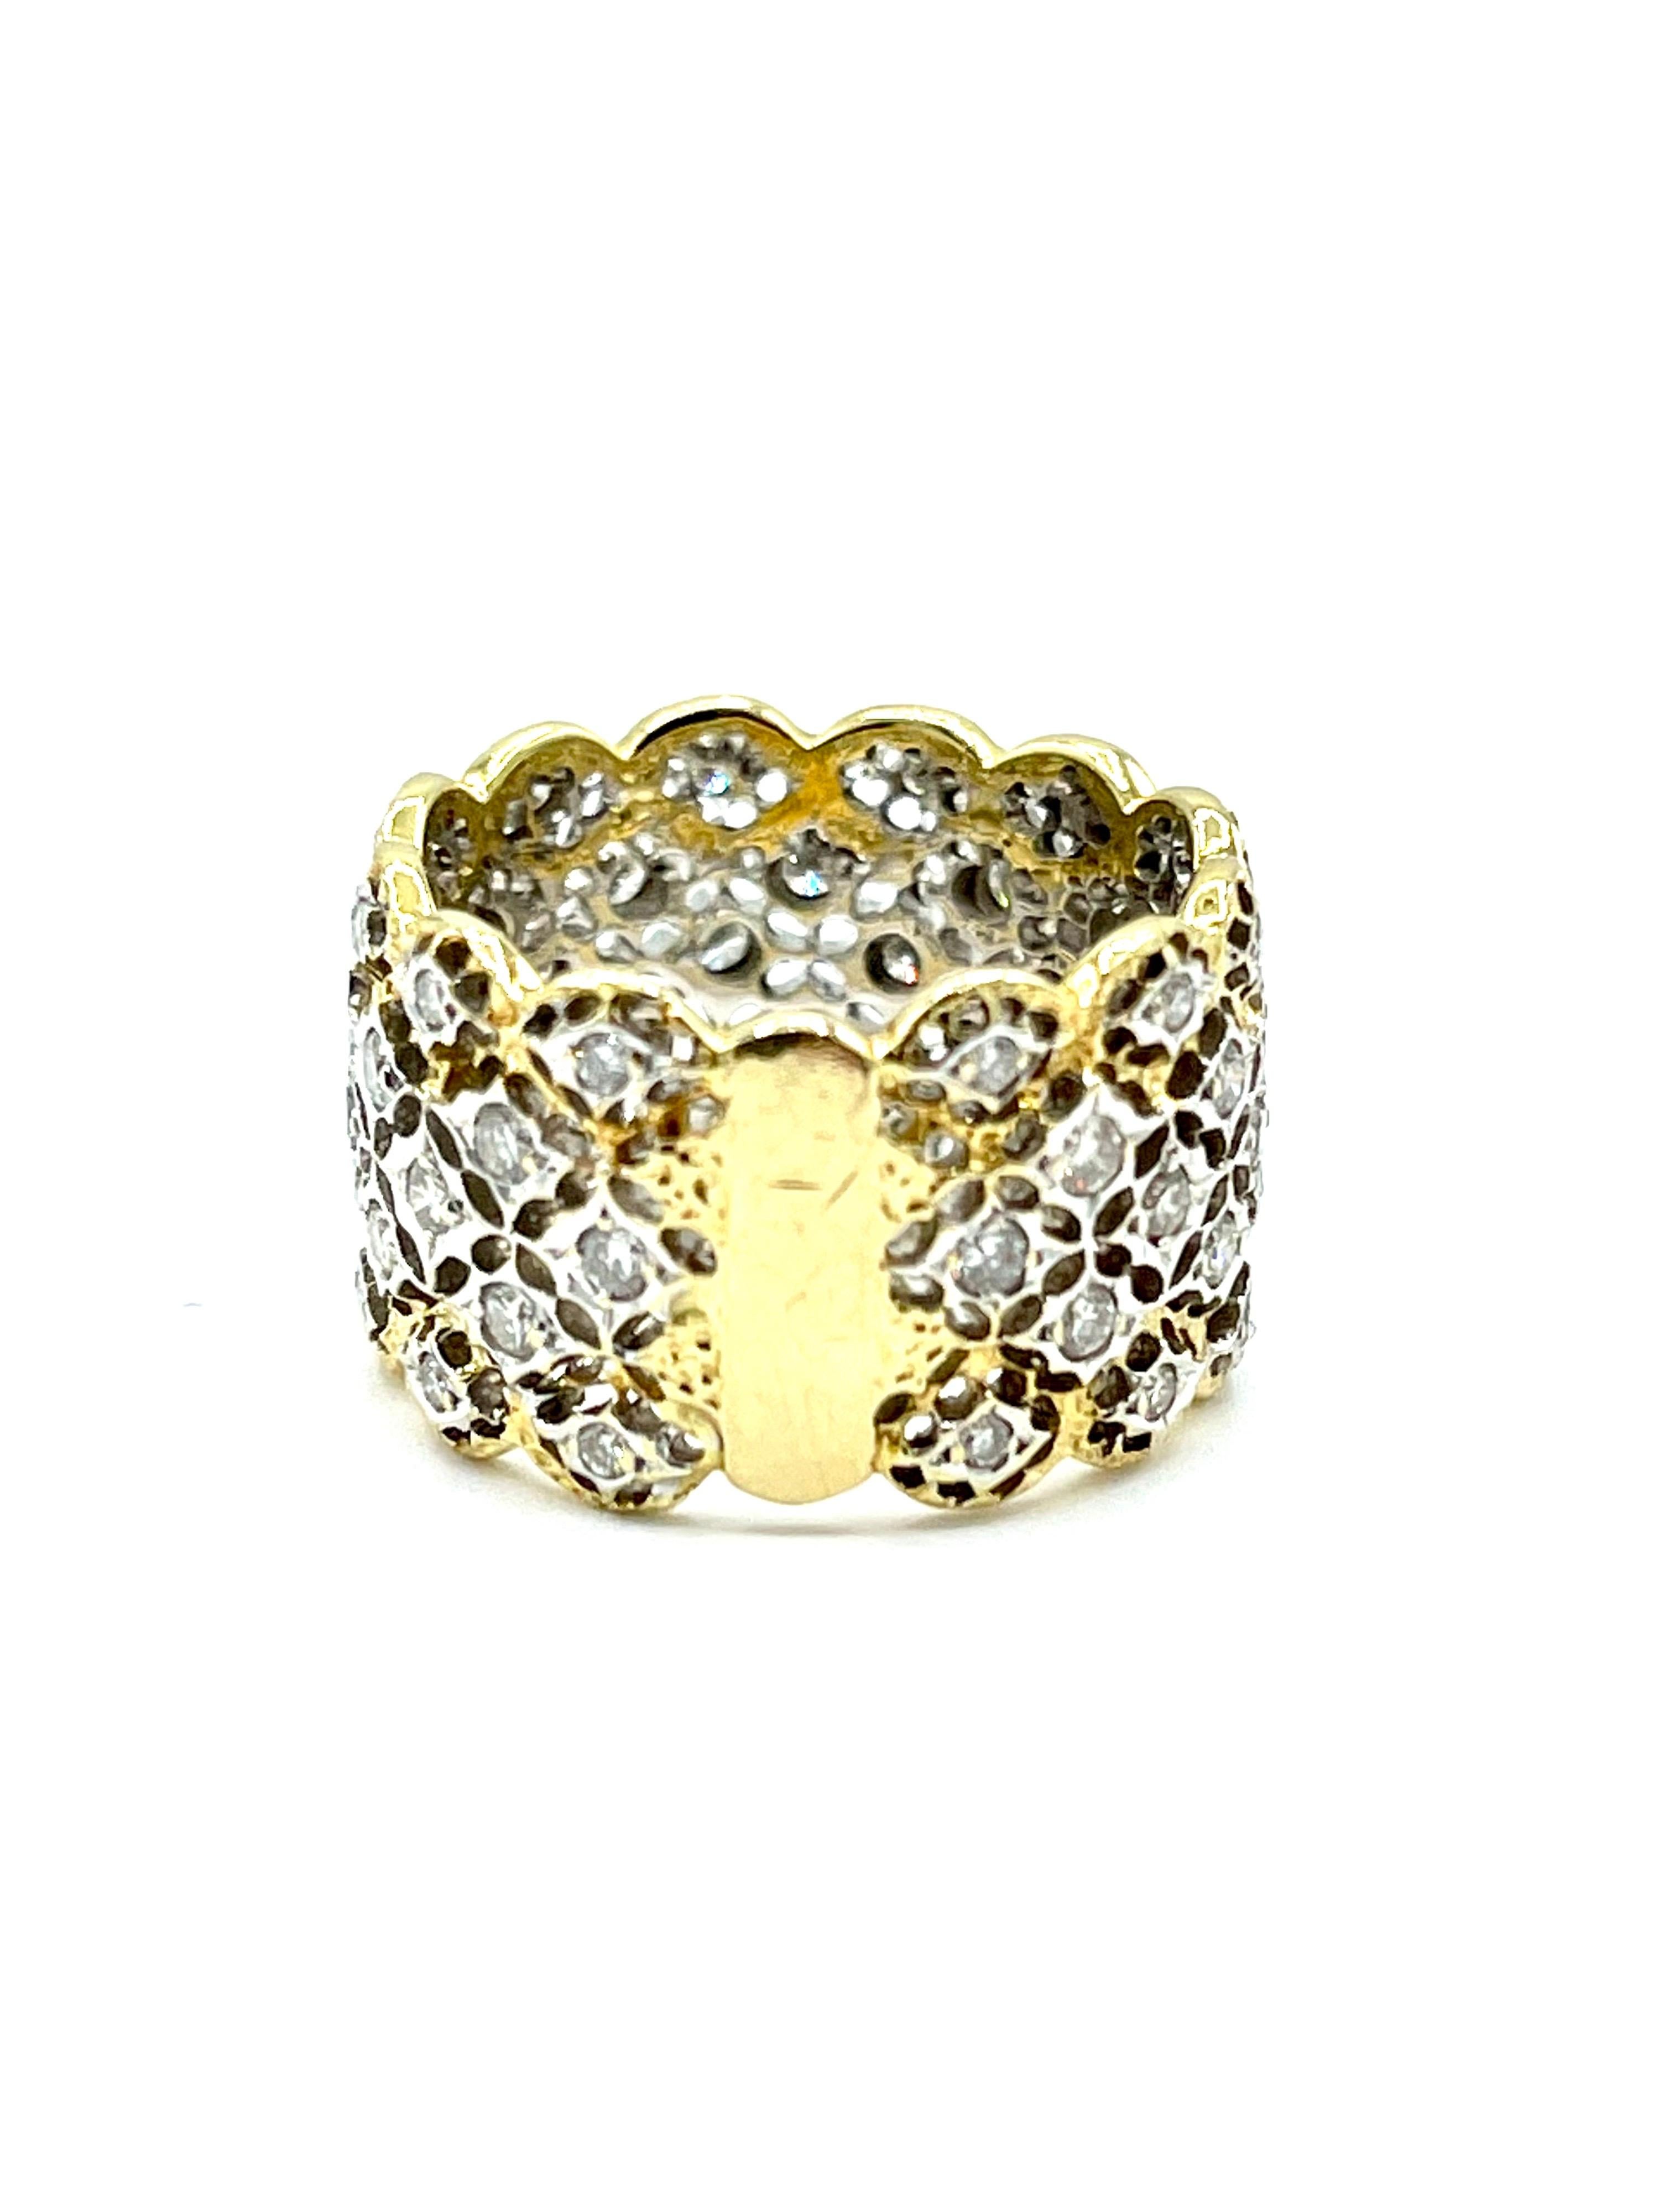 Retro 0.78 Carat Round Brilliant Diamond and 18 Carat White and Yellow Gold Band Ring For Sale